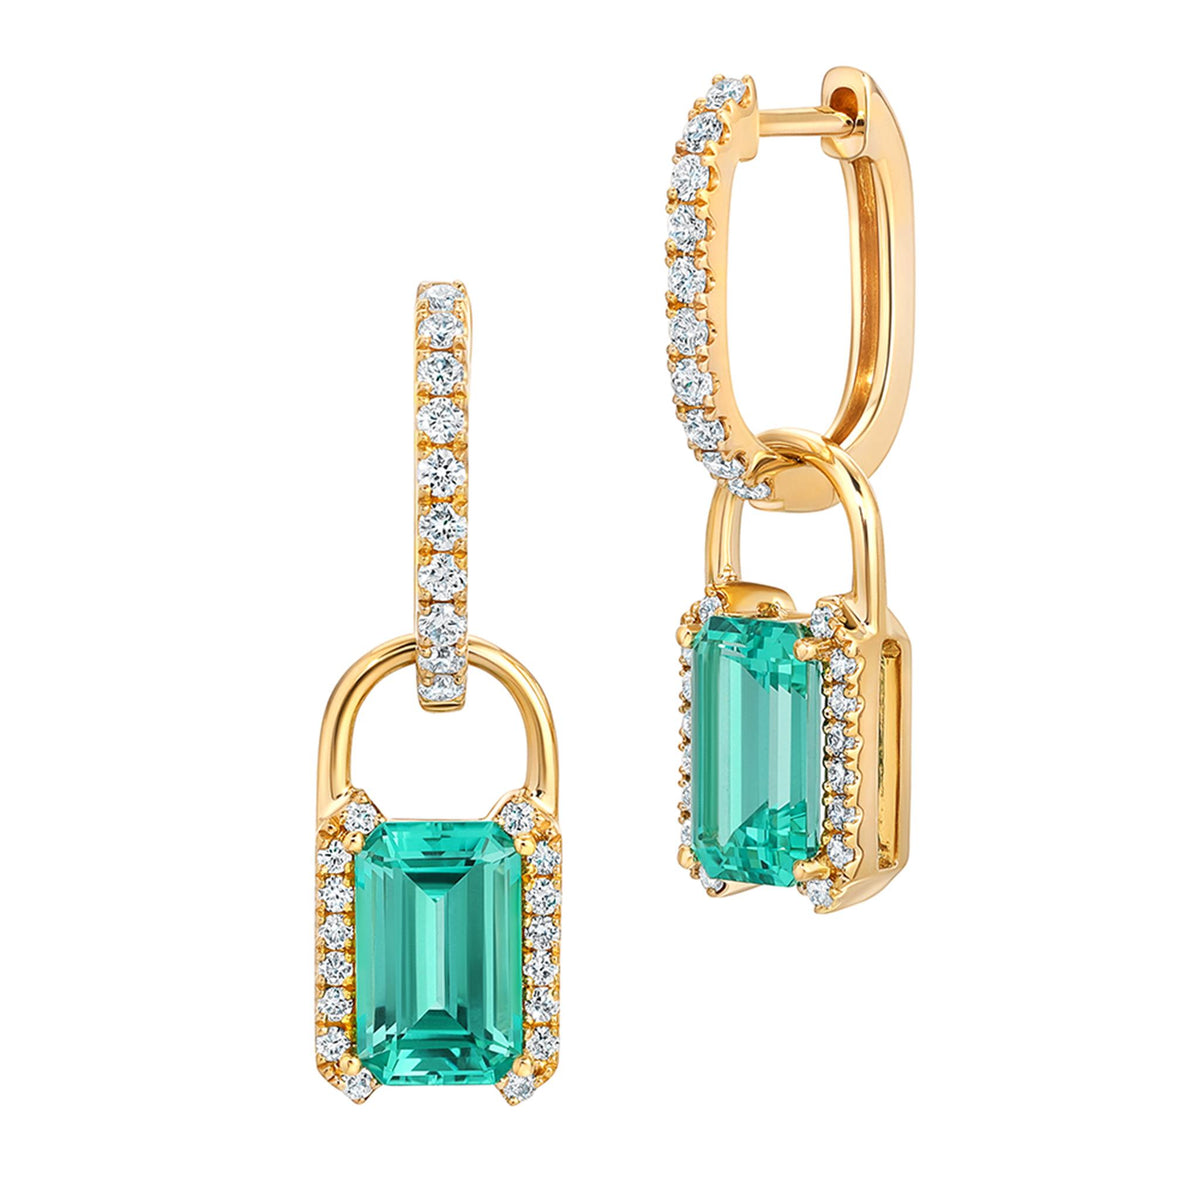 14Kt Yellow Gold Dangle Earrings With 2.96ct Chatham Lab Created Mint-Colored Chrysoberyl